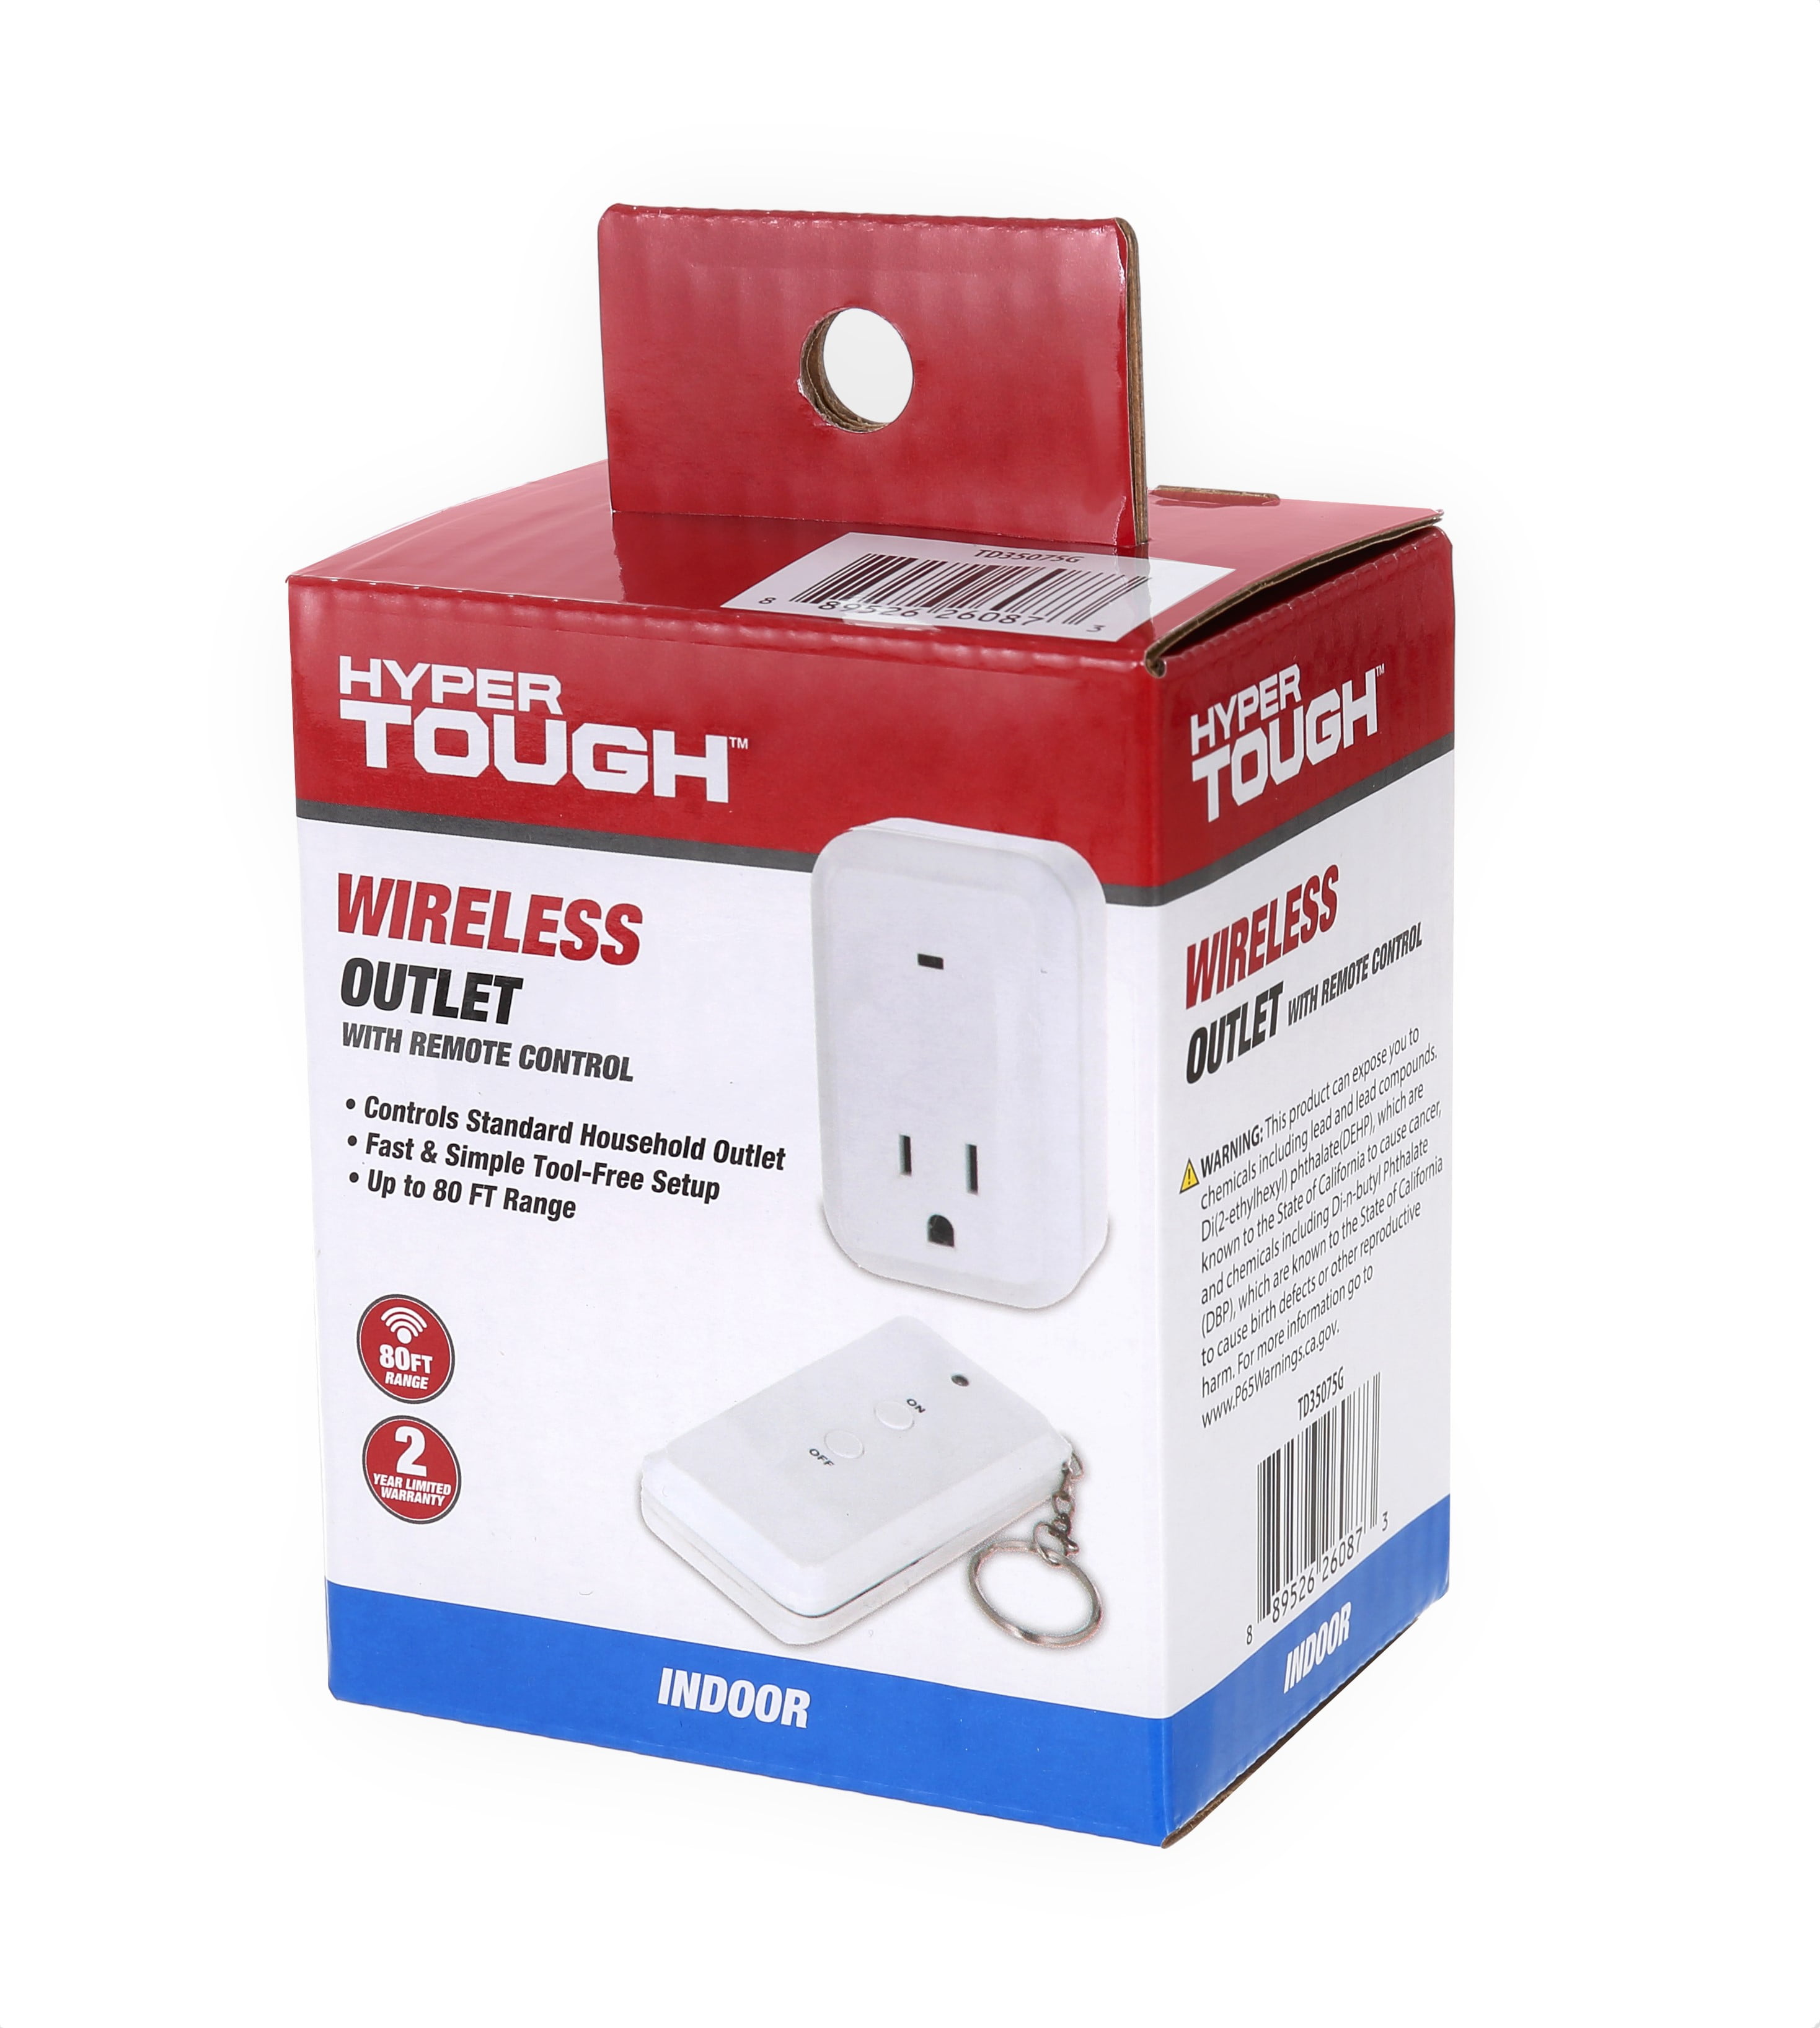 Utilitech Indoor 3-Piece Wireless Outlets #5071935 w/ Remote Control New R2